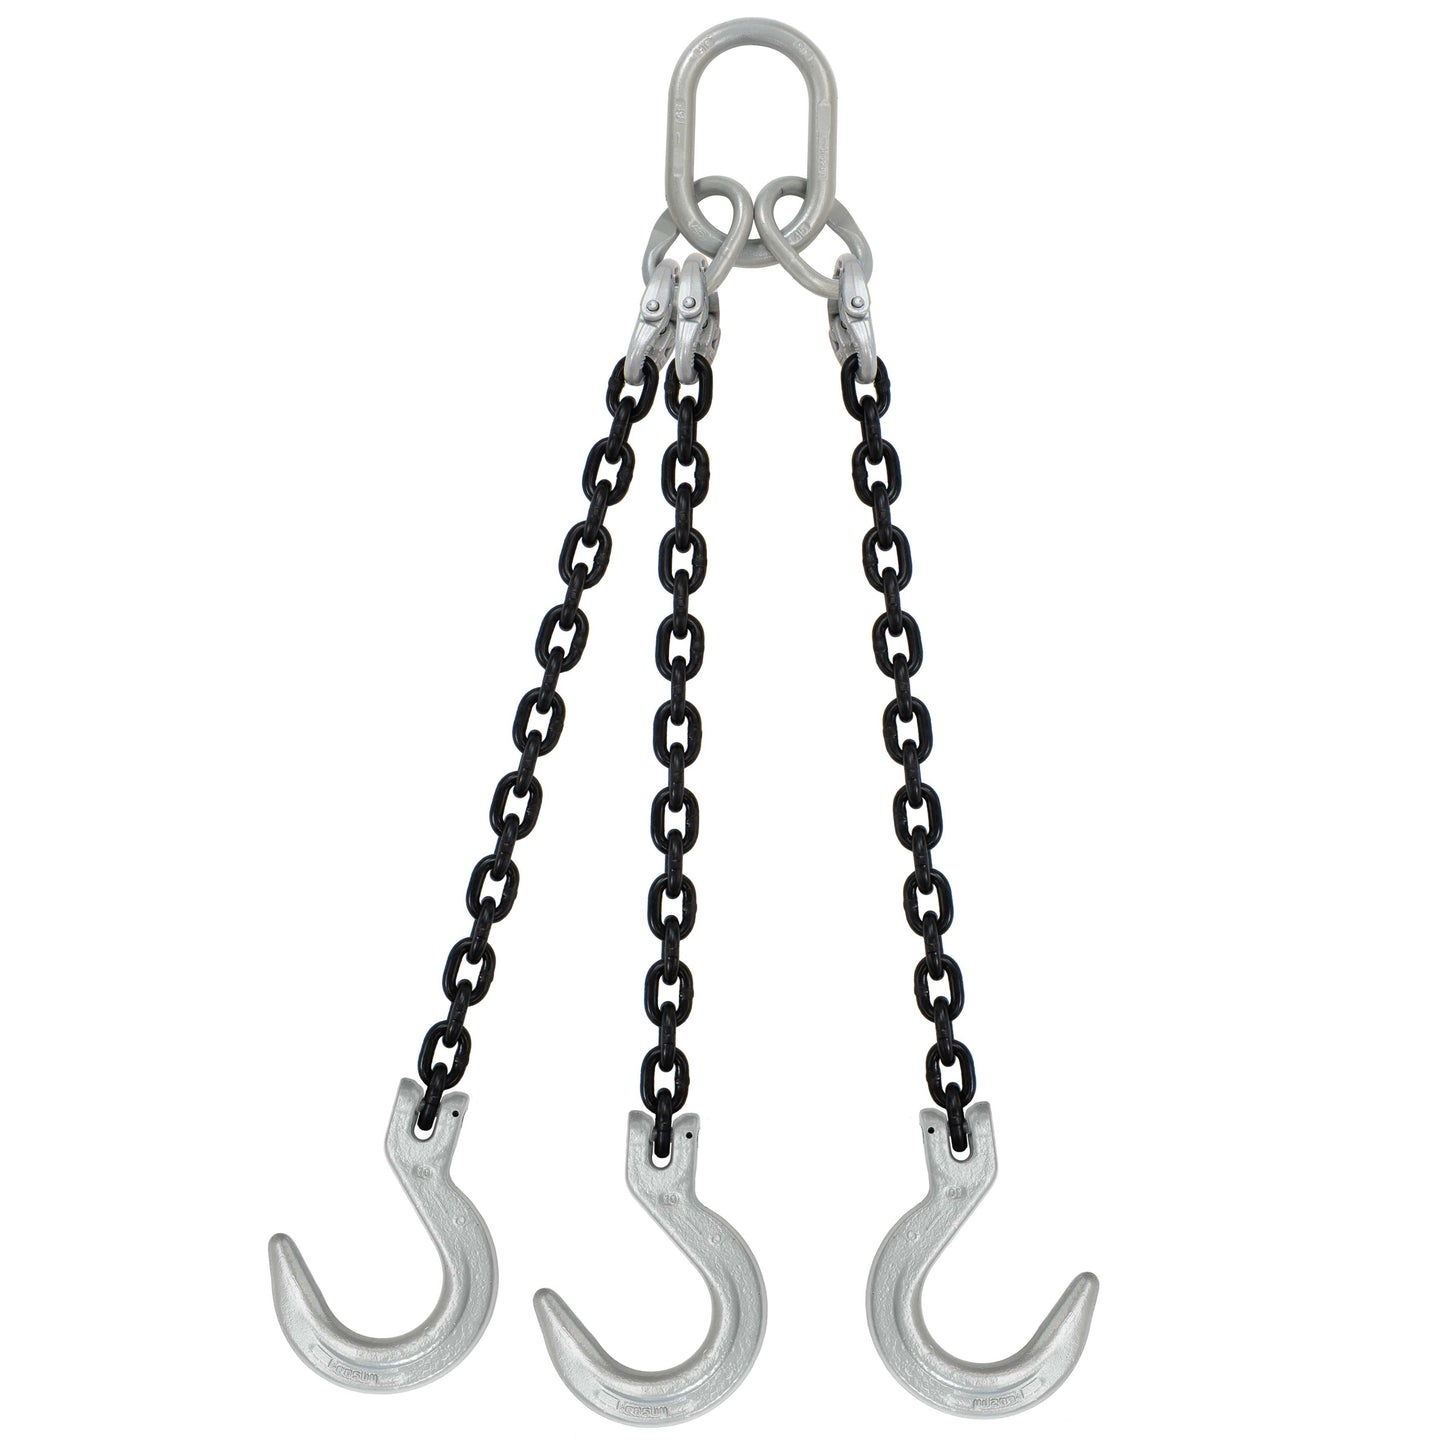 12 inch x 16 foot Domestic 3 Leg Chain Sling w Crosby Foundry Hooks Grade 100 image 1 of 2